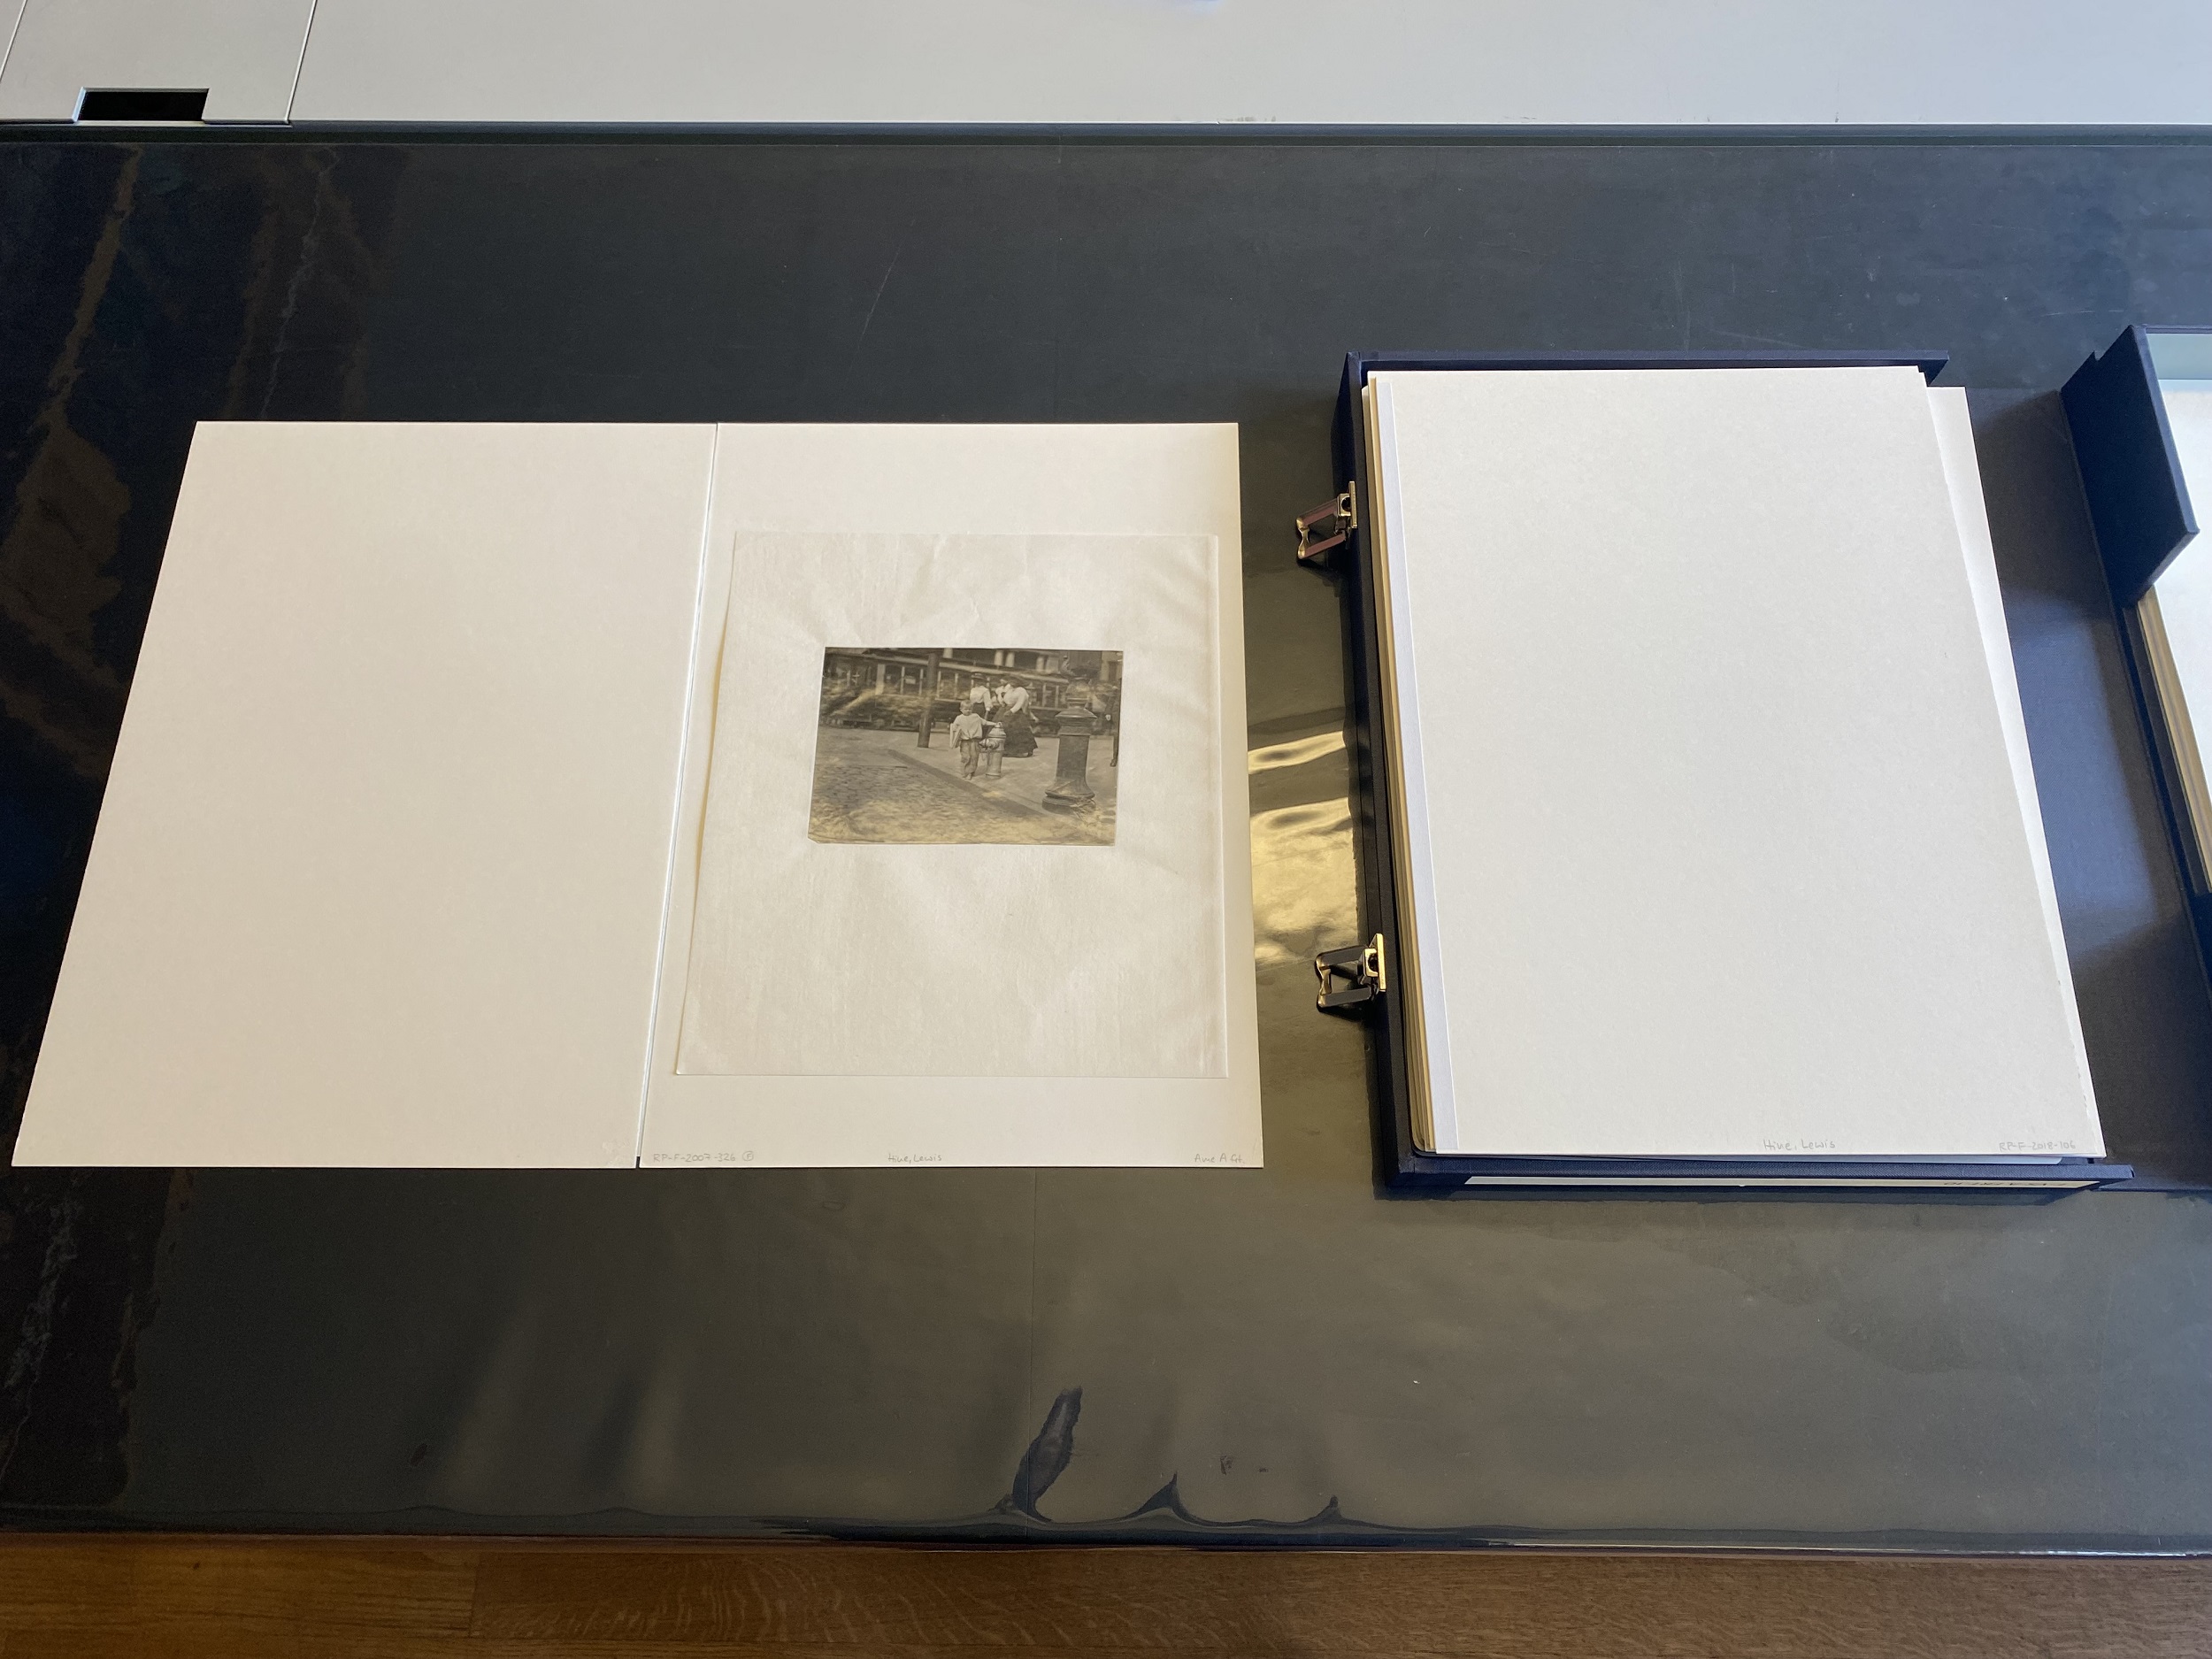 Photograph of an open archival storage box, with the photograph in figure 2 on the left.